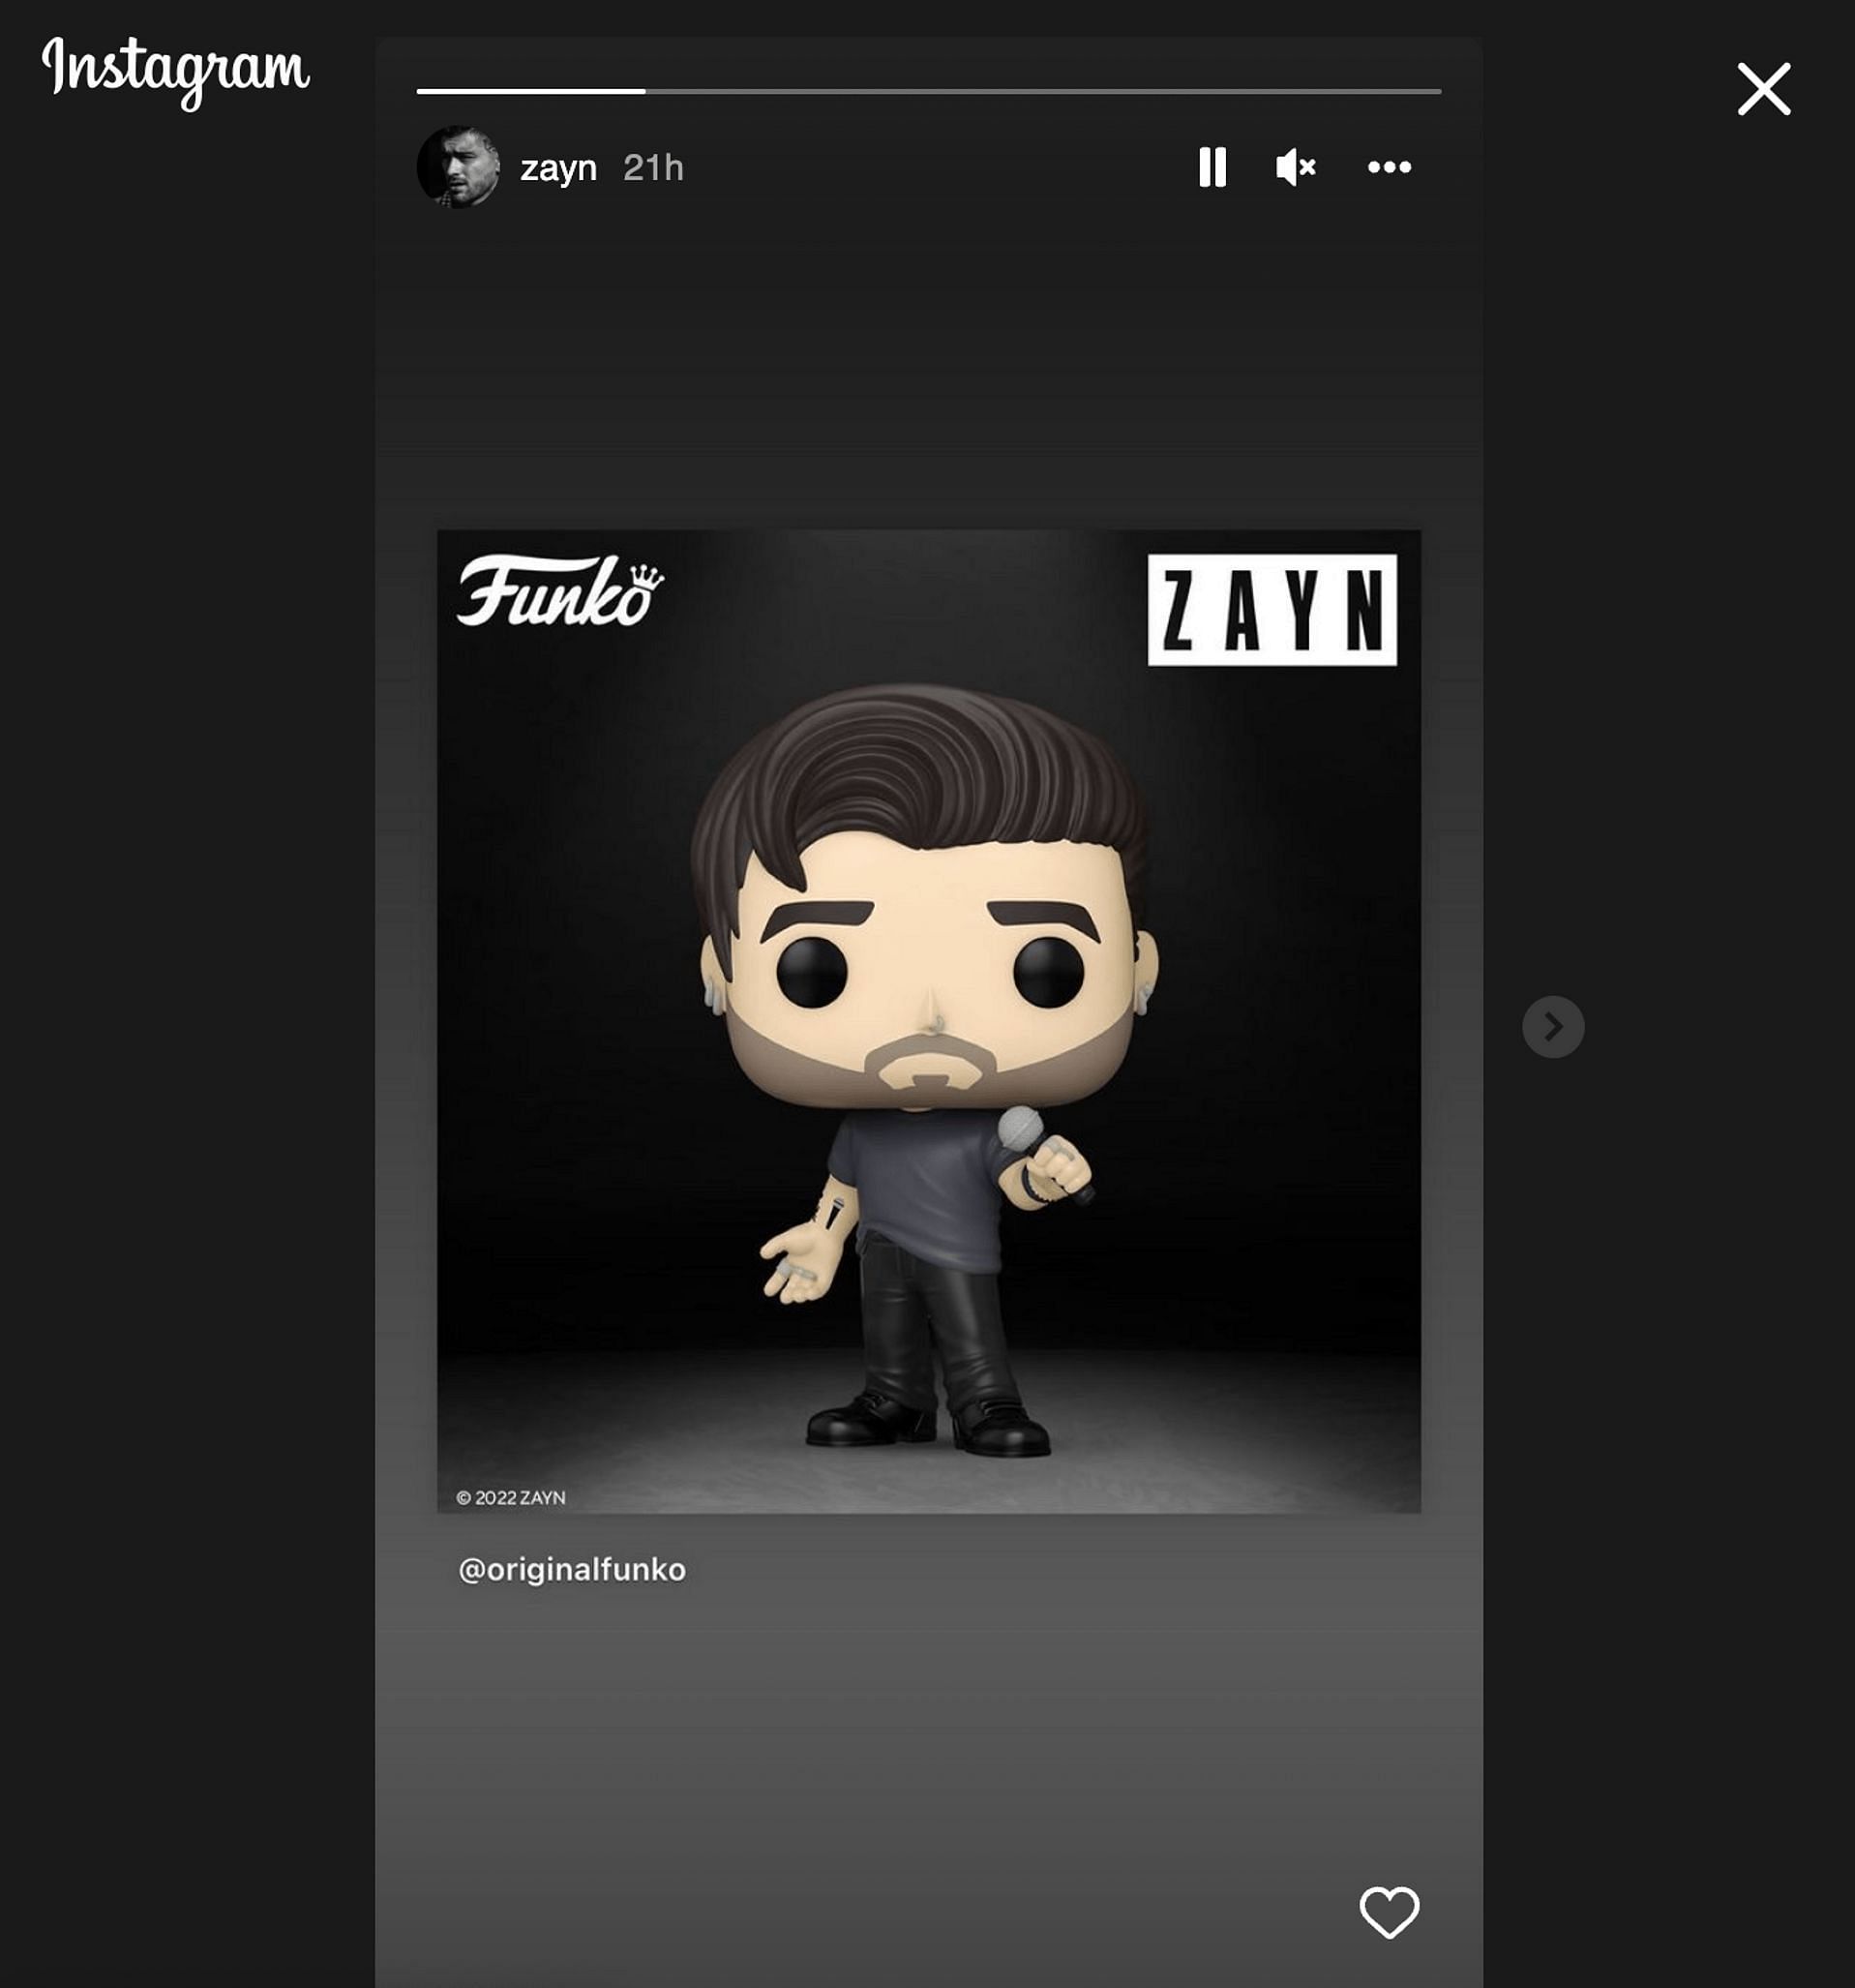 Zayn Malik shared a picture of his Funko Pop with his fans on his Instagram story. (Image via @zayn/ Instagram)